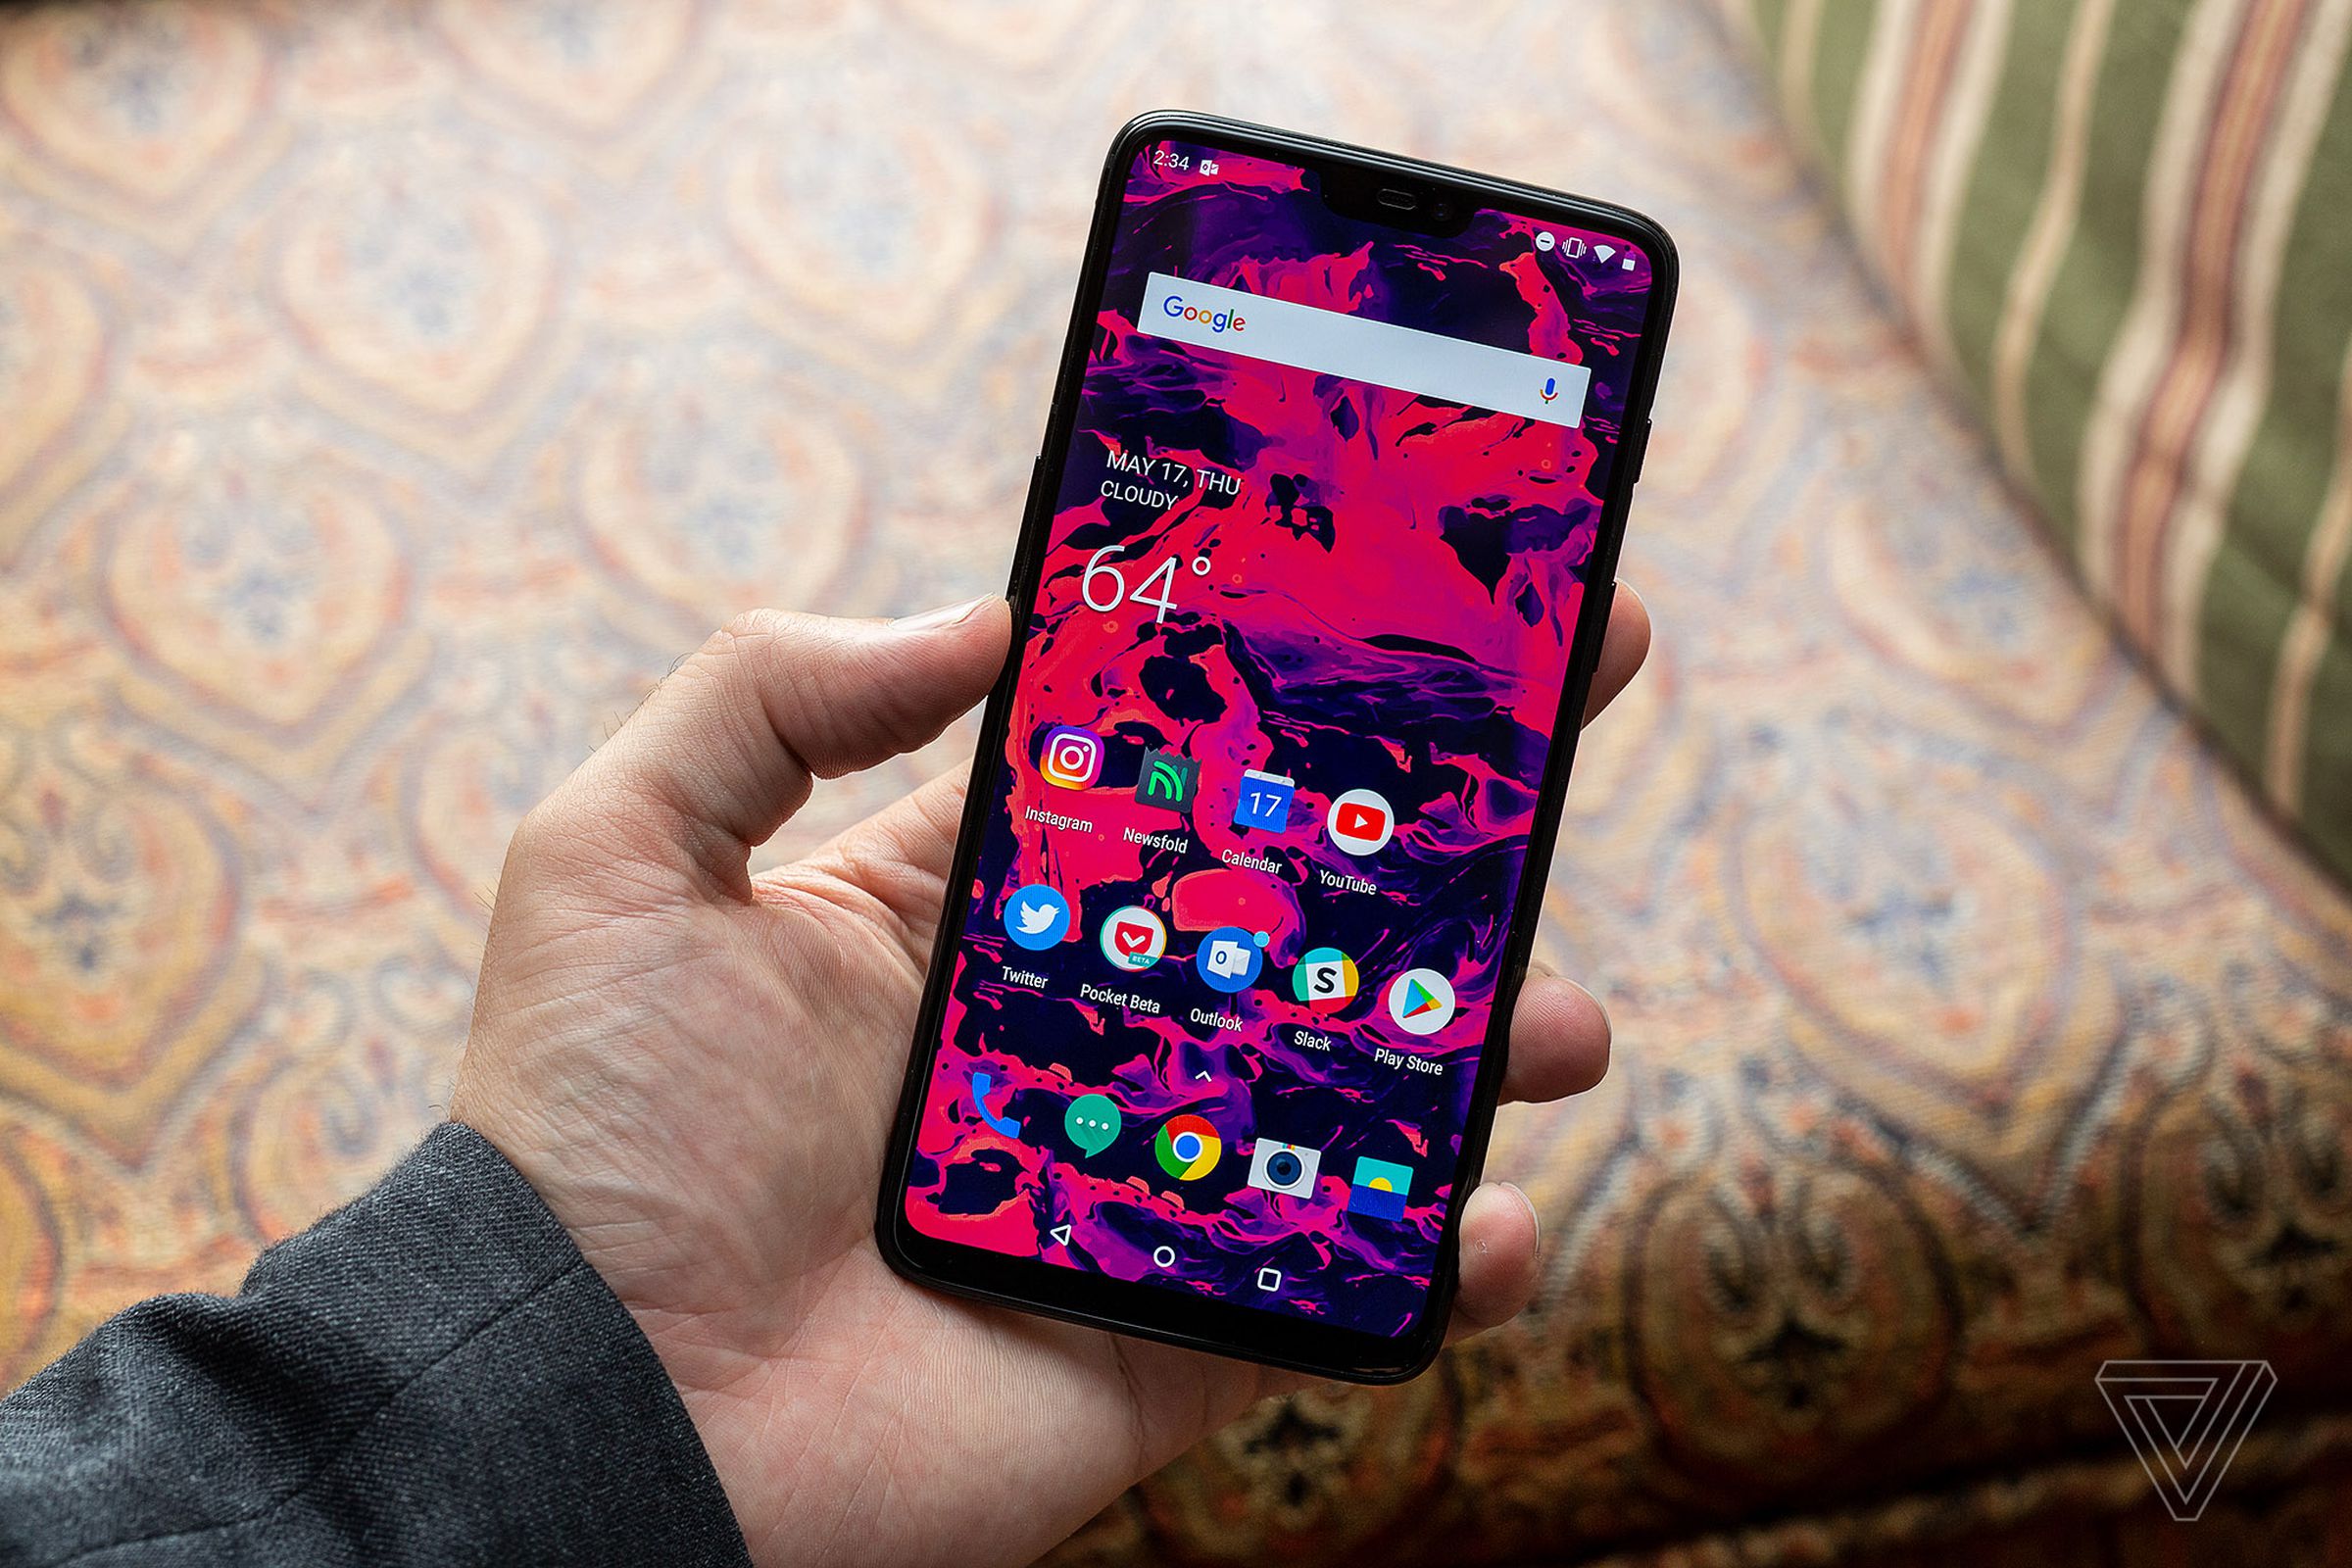 Google’s Pixel 3 XL will reportedly have a notch similar to other 2018 Android smartphones like the OnePlus 6.